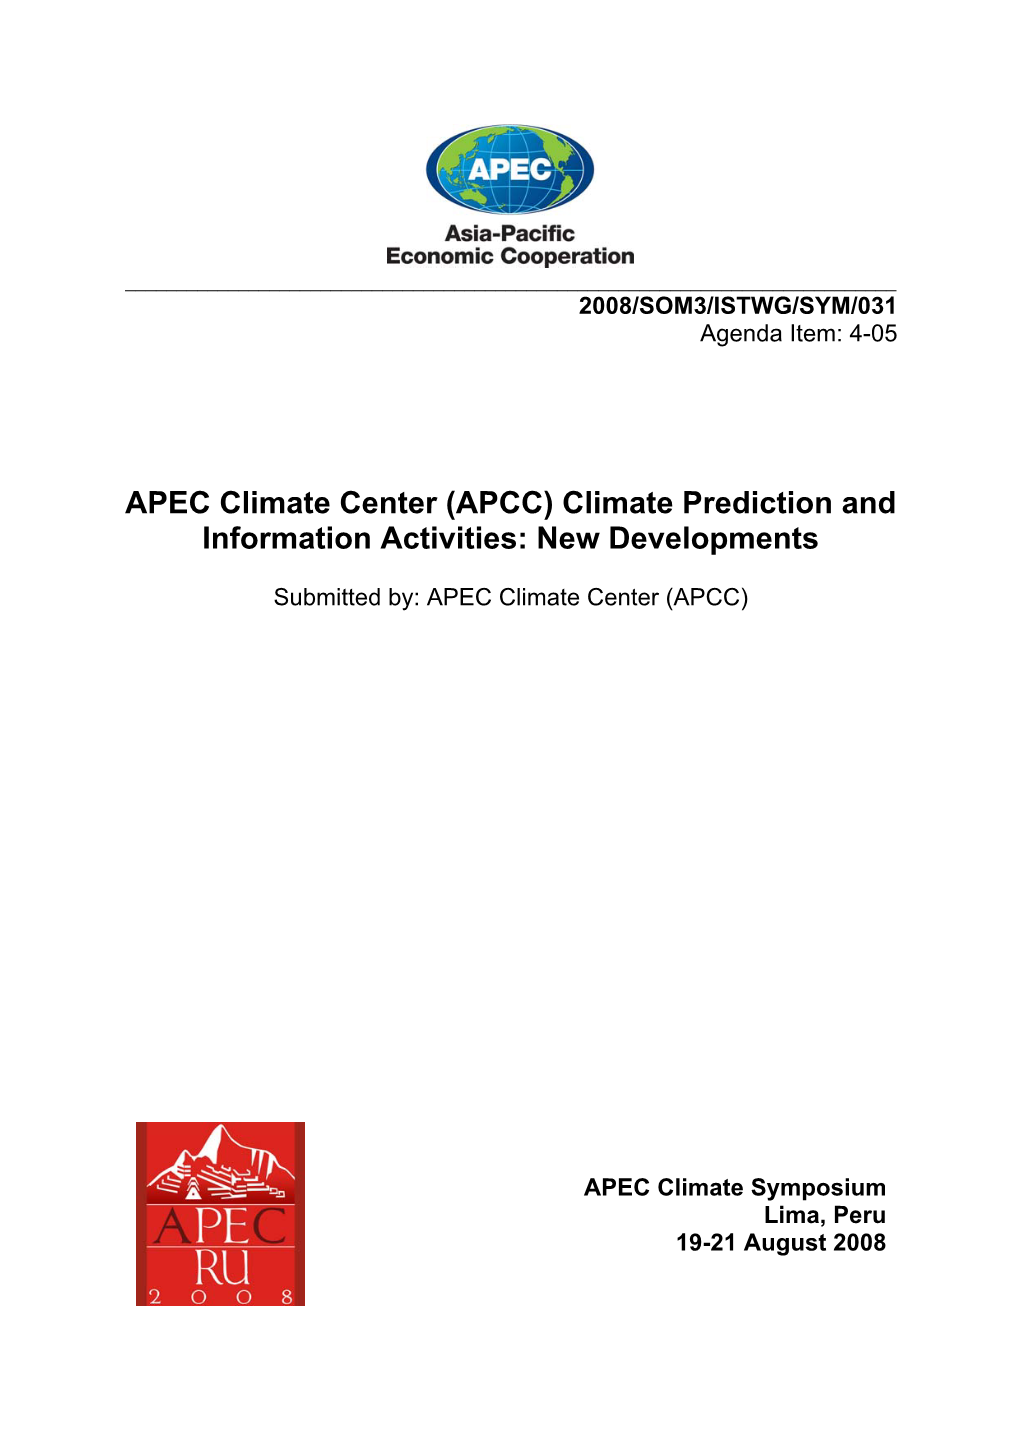 APEC Climate Center (APCC) Climate Prediction and Information Activities: New Developments